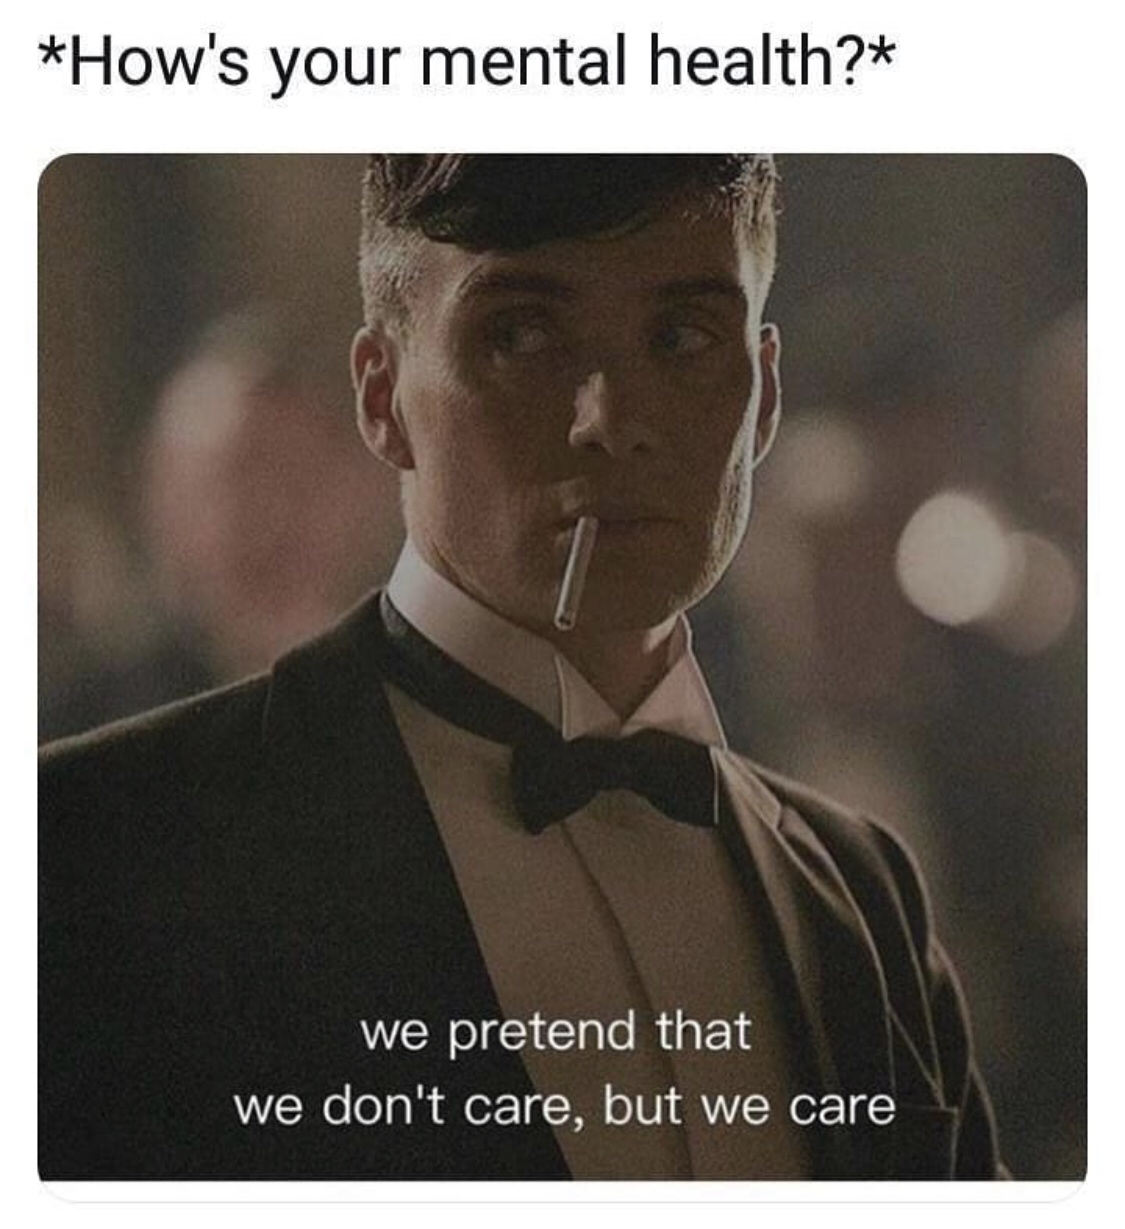 thomas shelby theme - How's your mental health? we pretend that we don't care, but we care